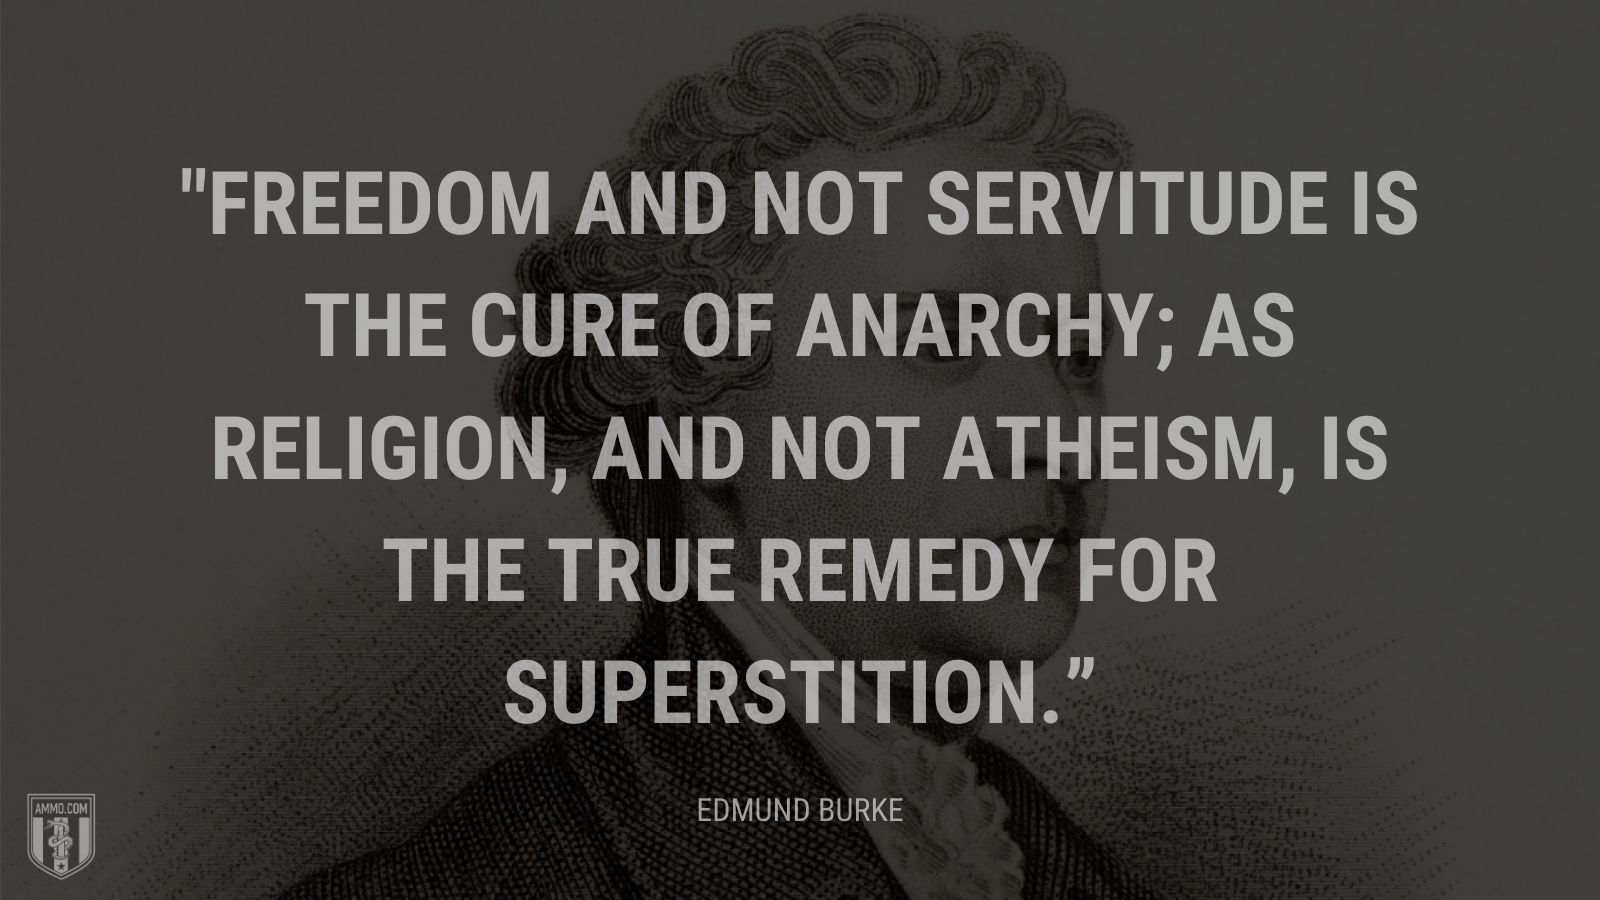 “Freedom and not servitude is the cure of anarchy; as religion, and not atheism, is the true remedy for superstition.” - Edmund Burke